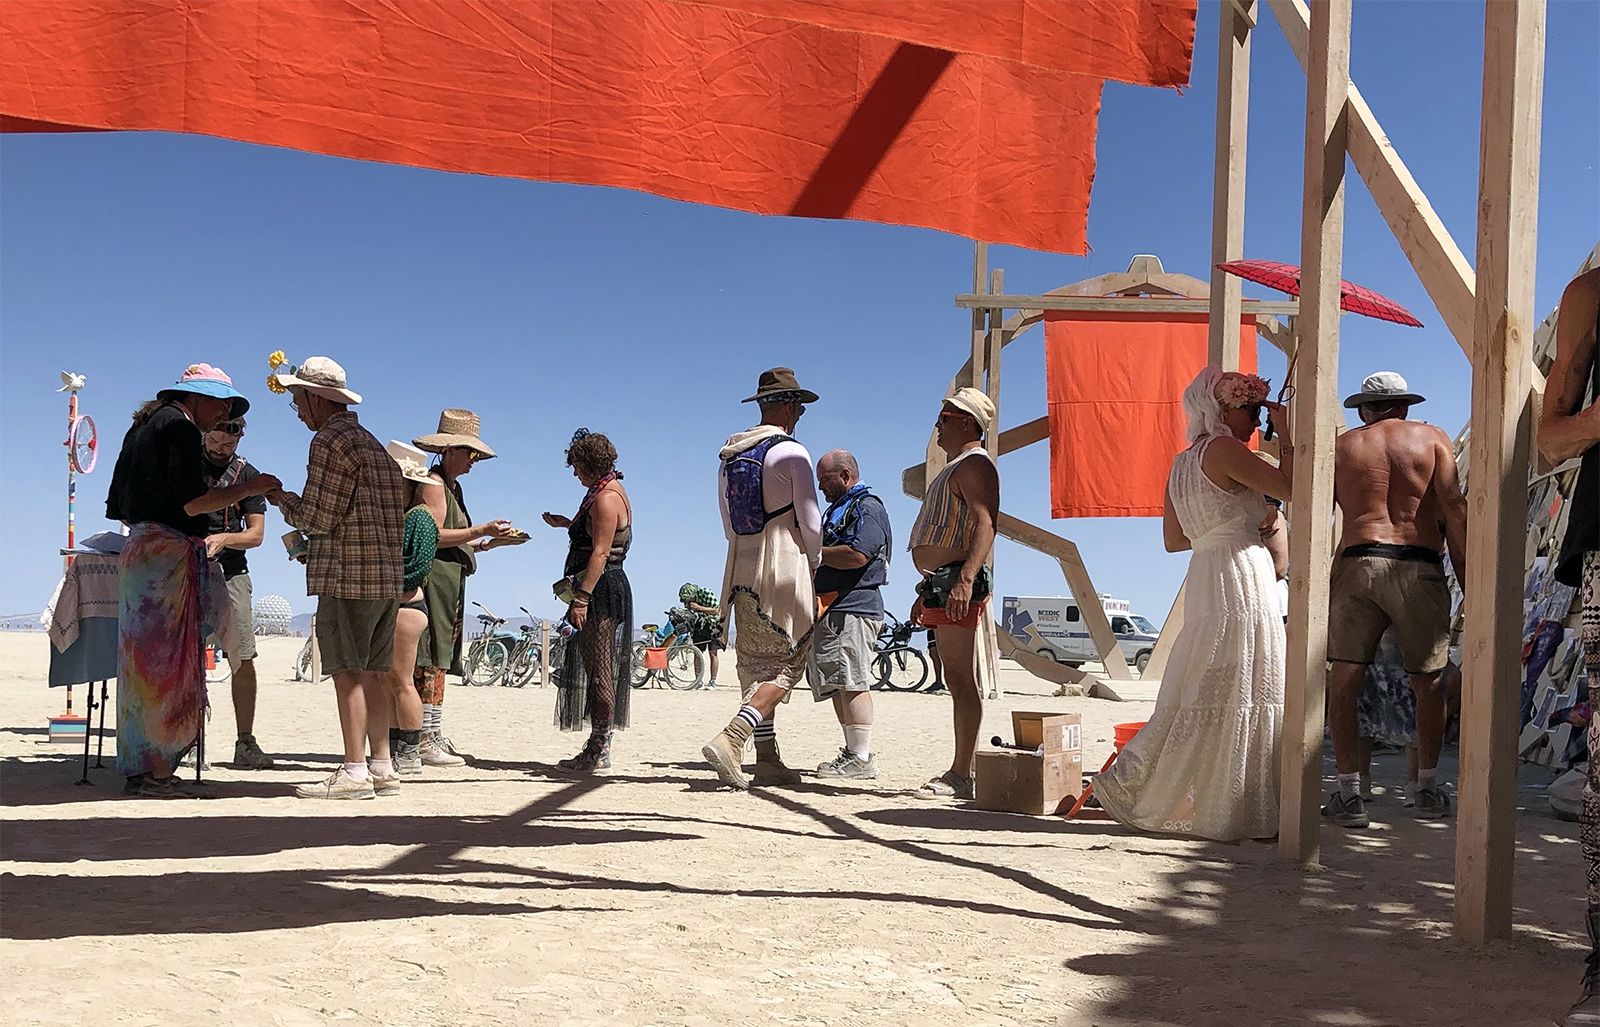 Religious AF camp offers communion during Burning Man 2022 in Black Rock City, Nevada. Photo by Alex Leach